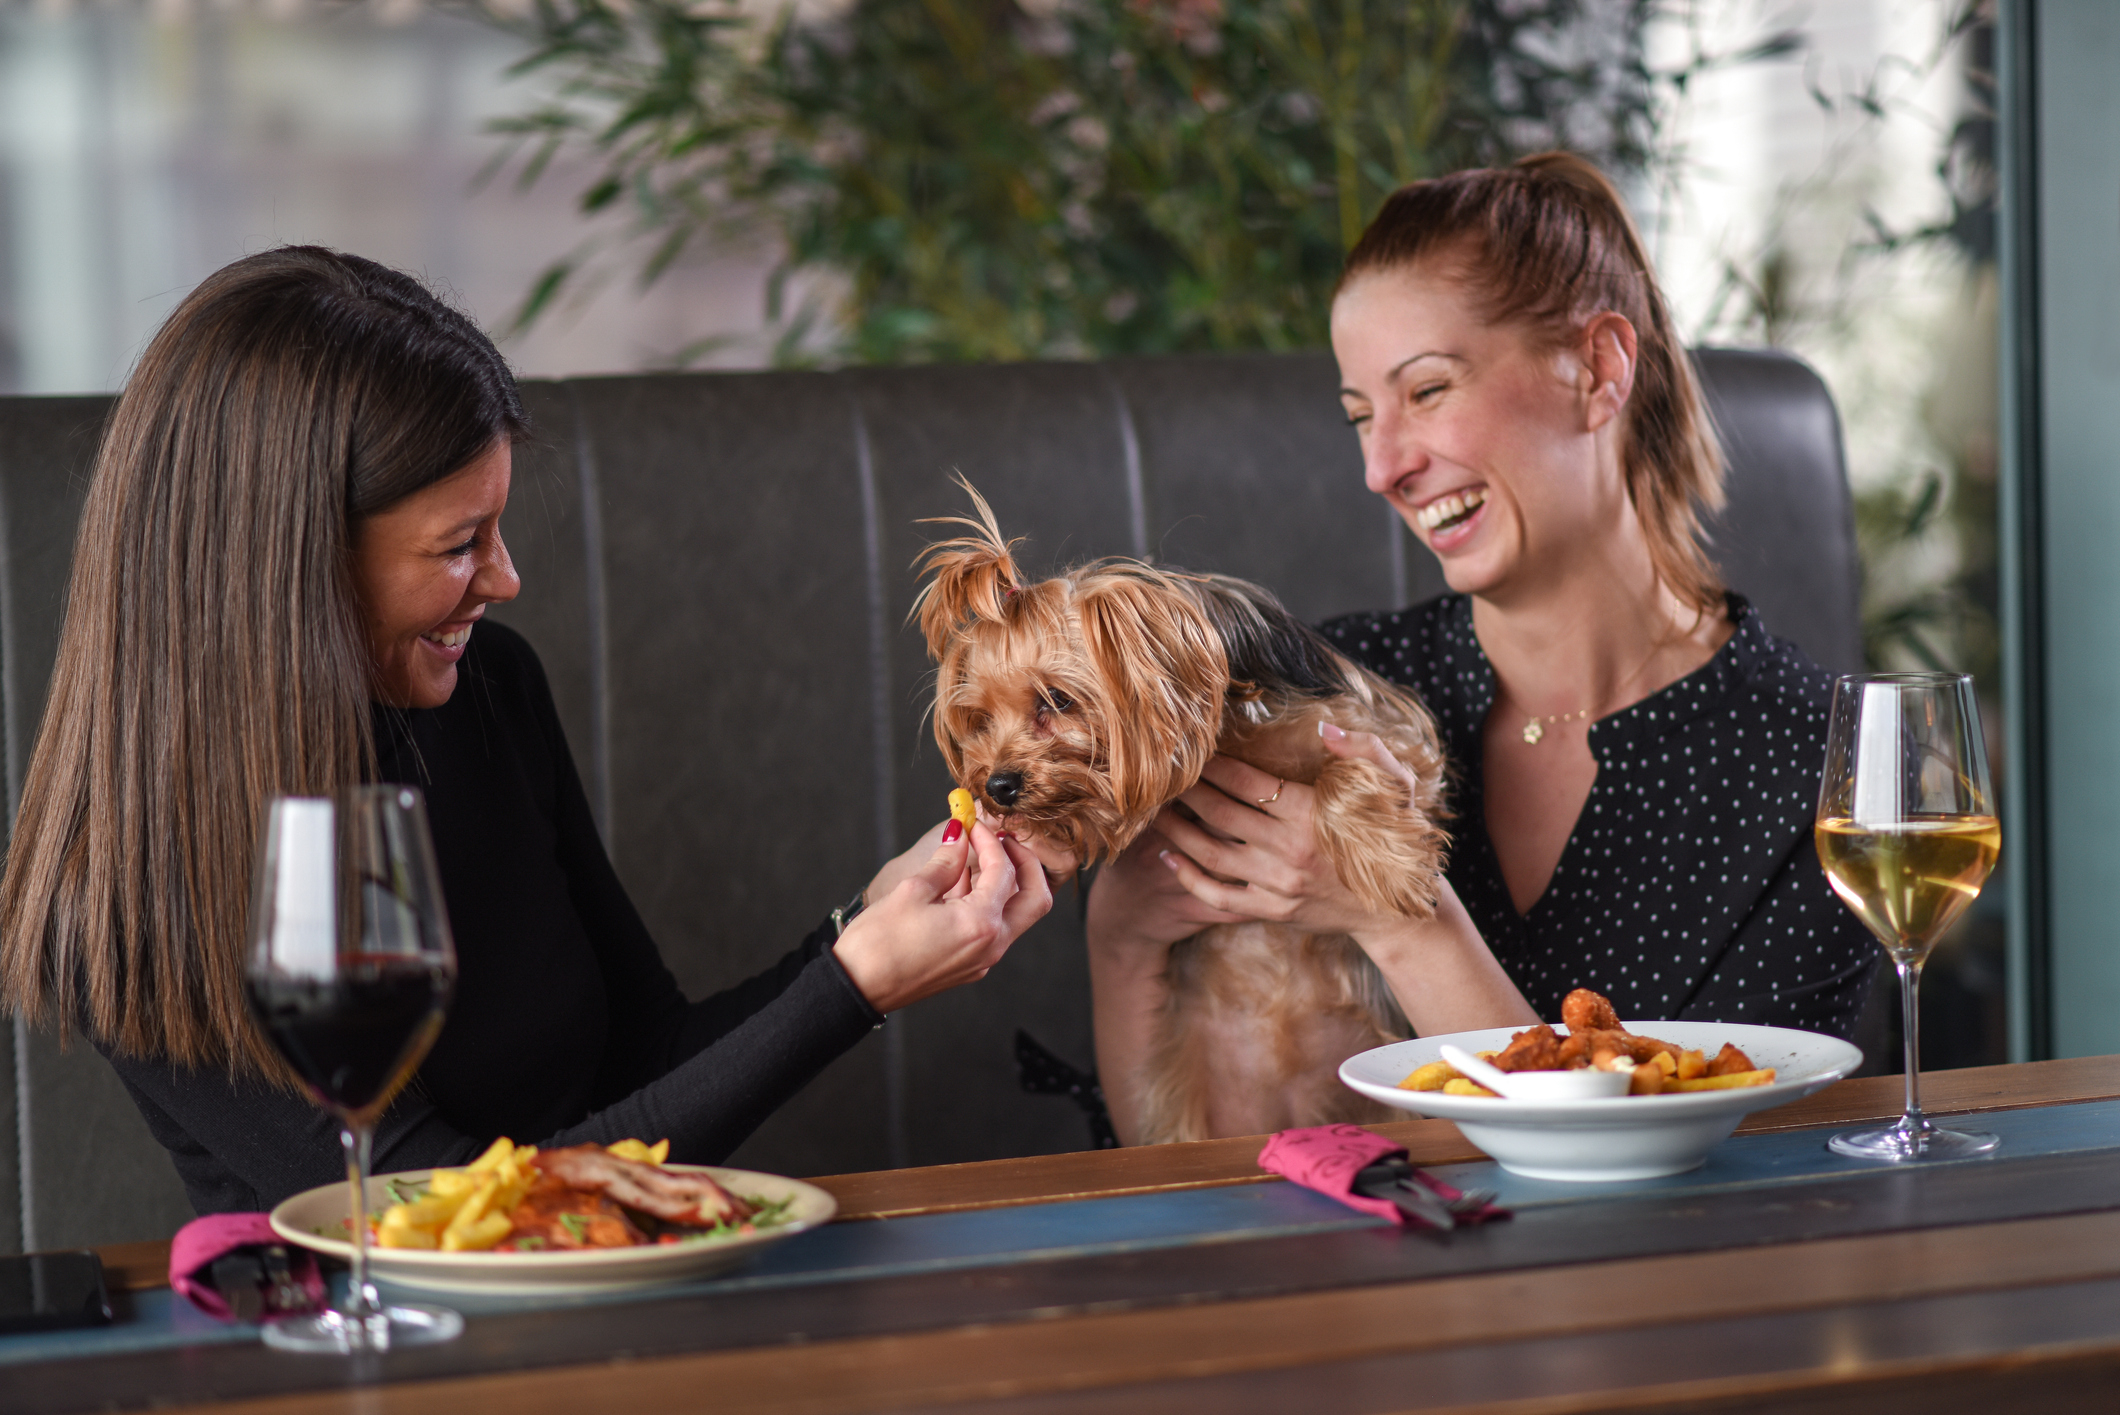 Two women playing with a dog in a restaurant